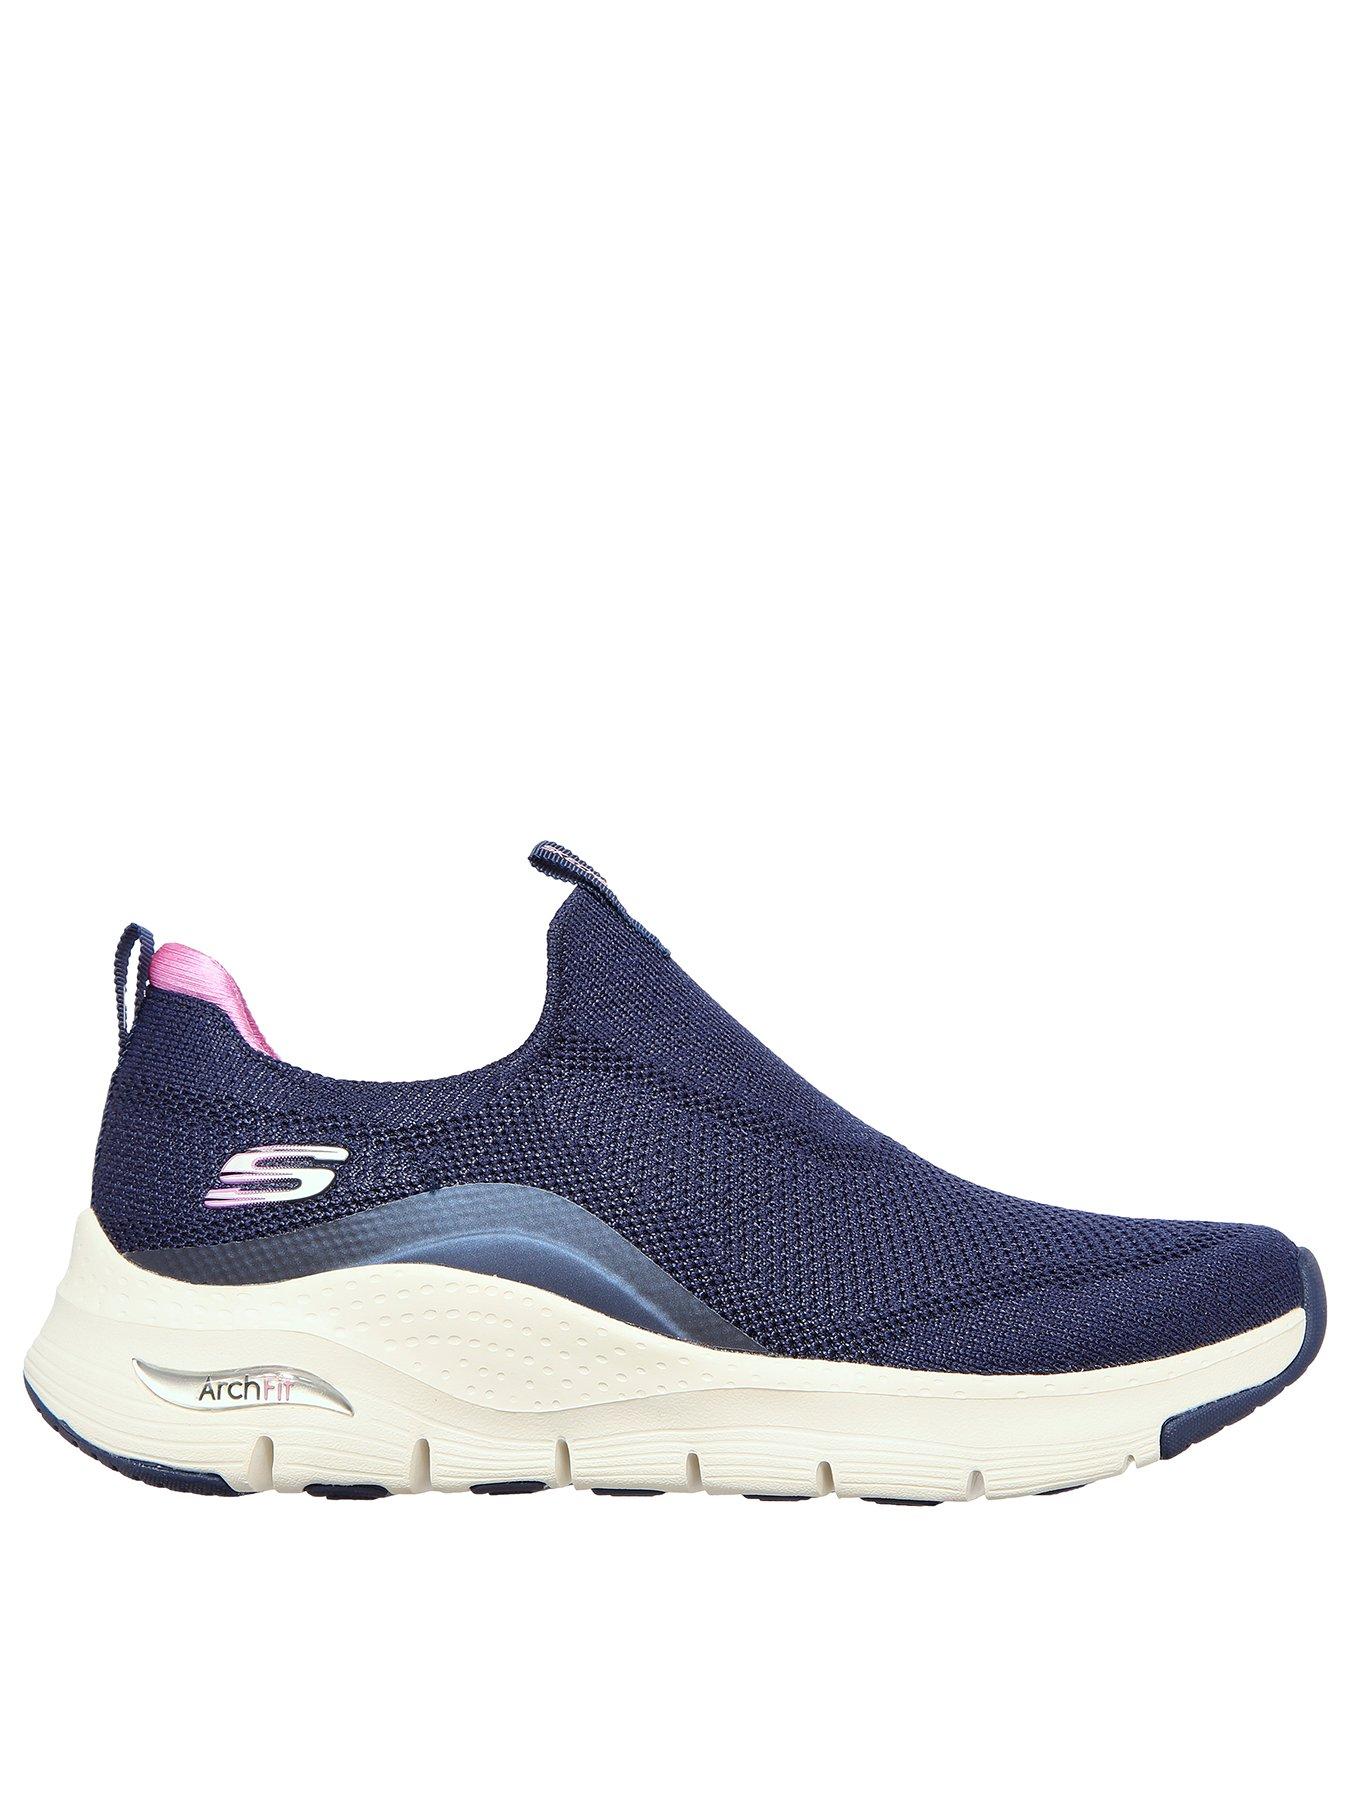 Women Arch Fit Engineered Knit Stretch Fit Slip-On Plimsoll - Navy/Purple